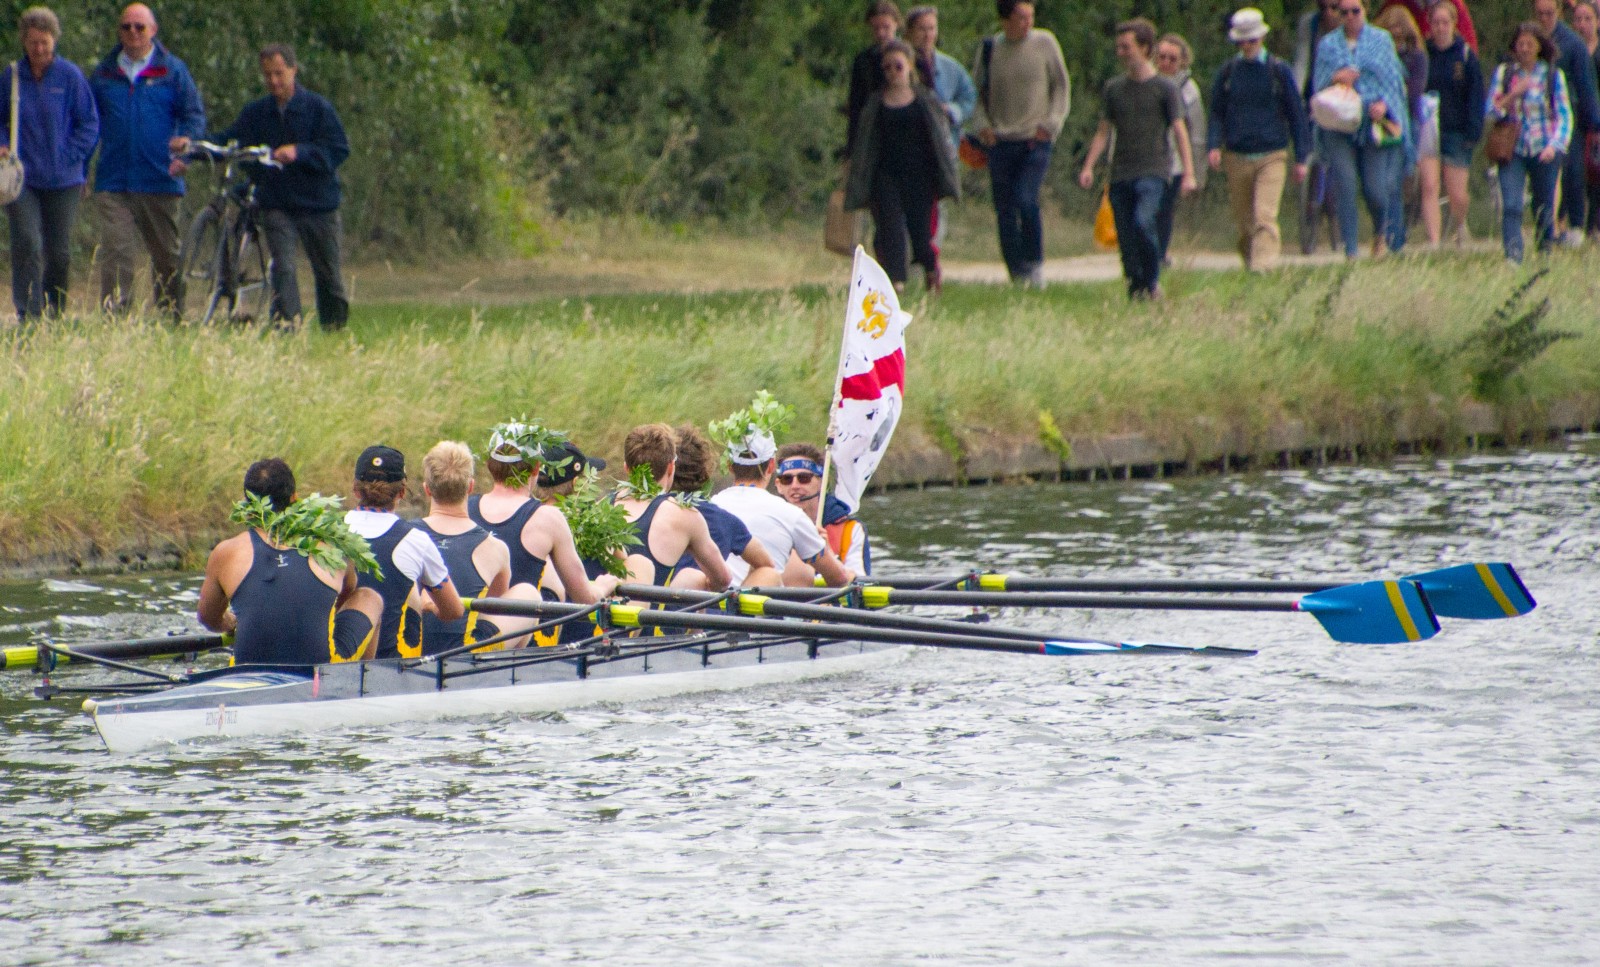 M1 (above), M2 and W1 all bladed at the May Bumps. Photo by Fiona Gilsenan